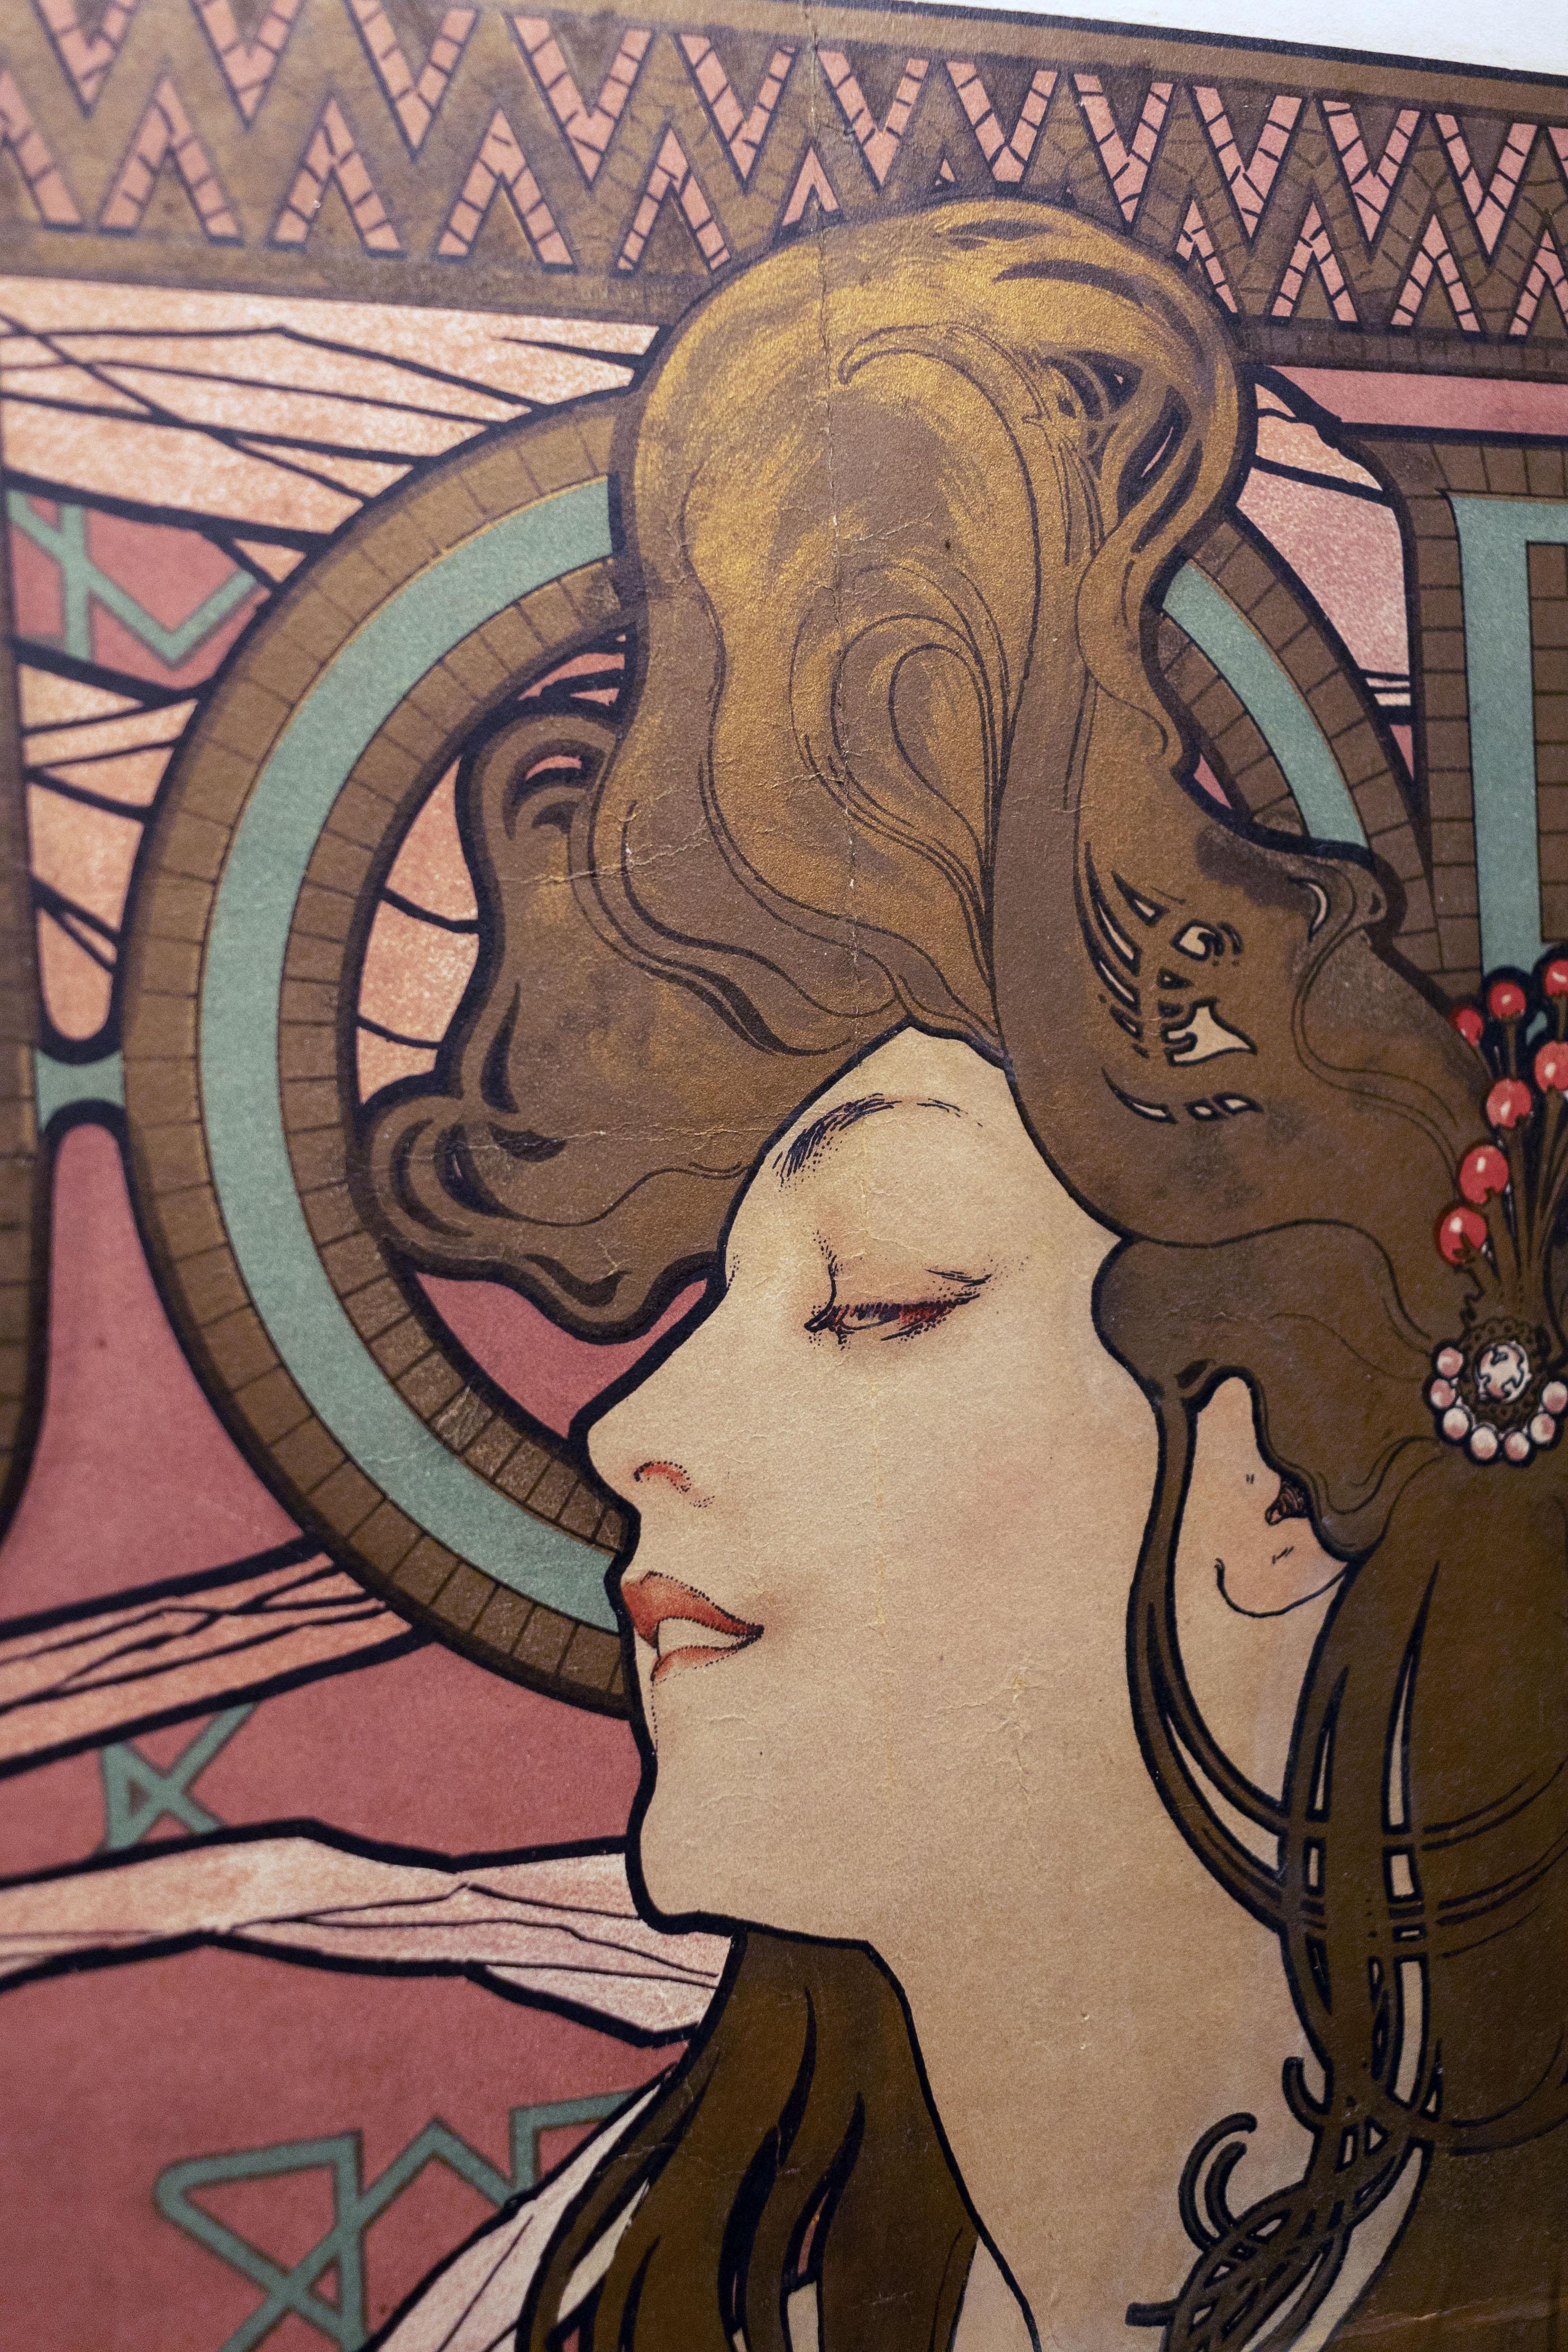 One of the most well-recognized images by Art Nouveau master painter and illustrator Alphonse Mucha.  The lithograph measures 20.5 by 16.25 inches.  It beautifully framed and ready to hang in an antique, gold leaf picture frame with Art Nouveau